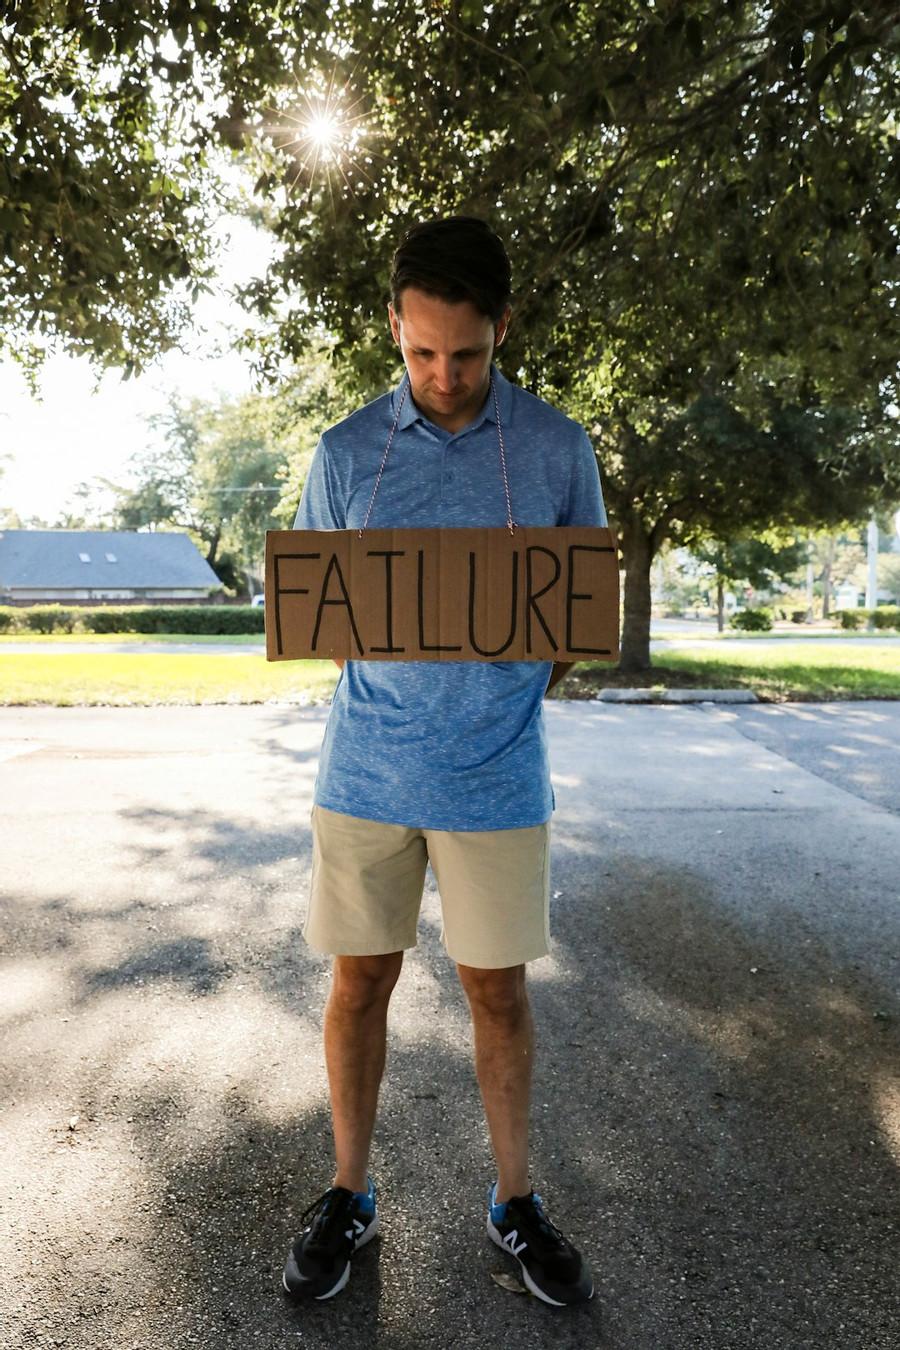 Why can failing be a good thing?